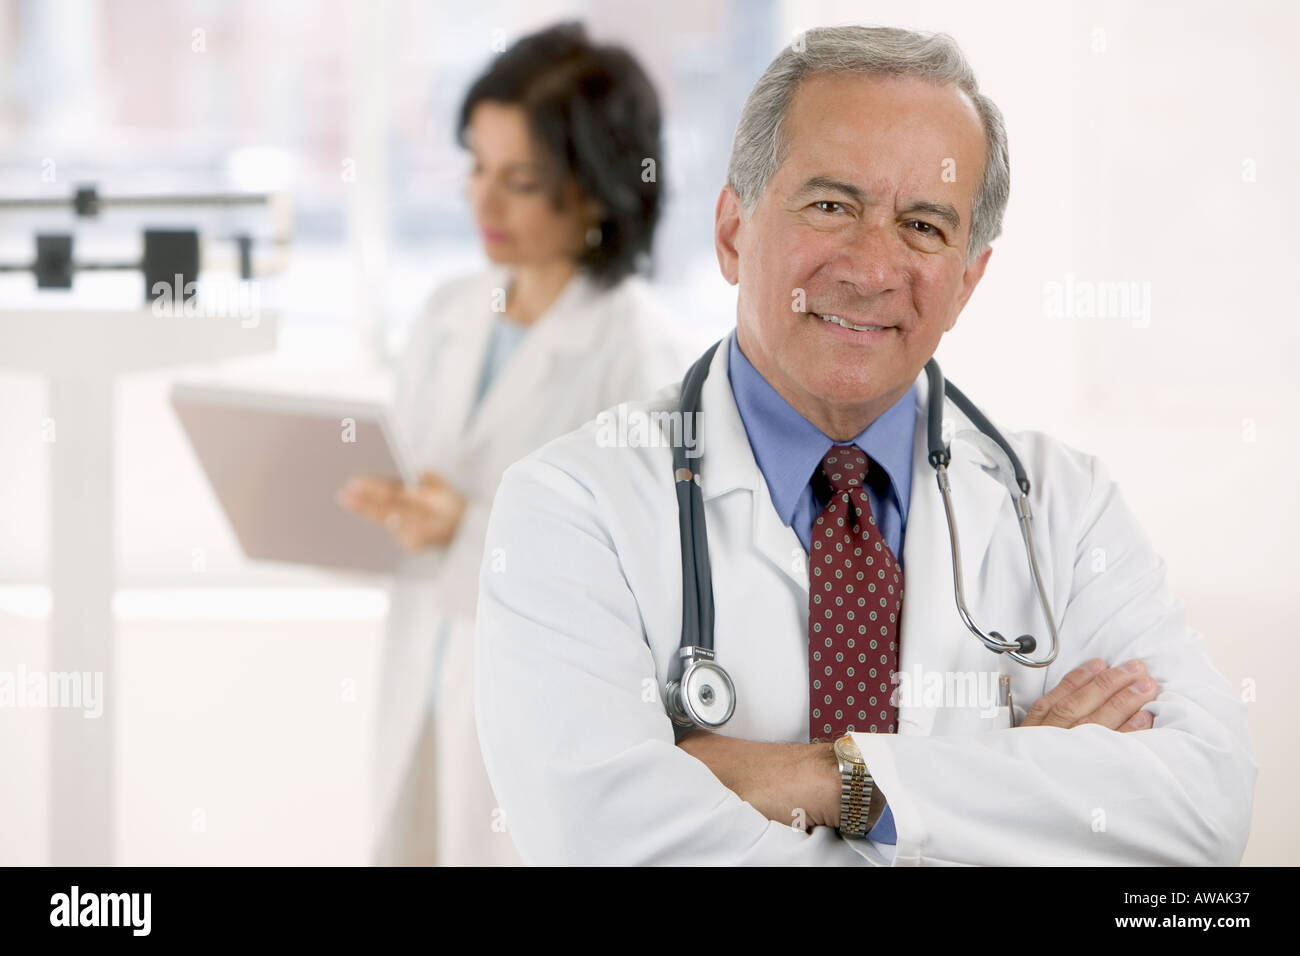 Male and female healthcare professionals Stock Photo